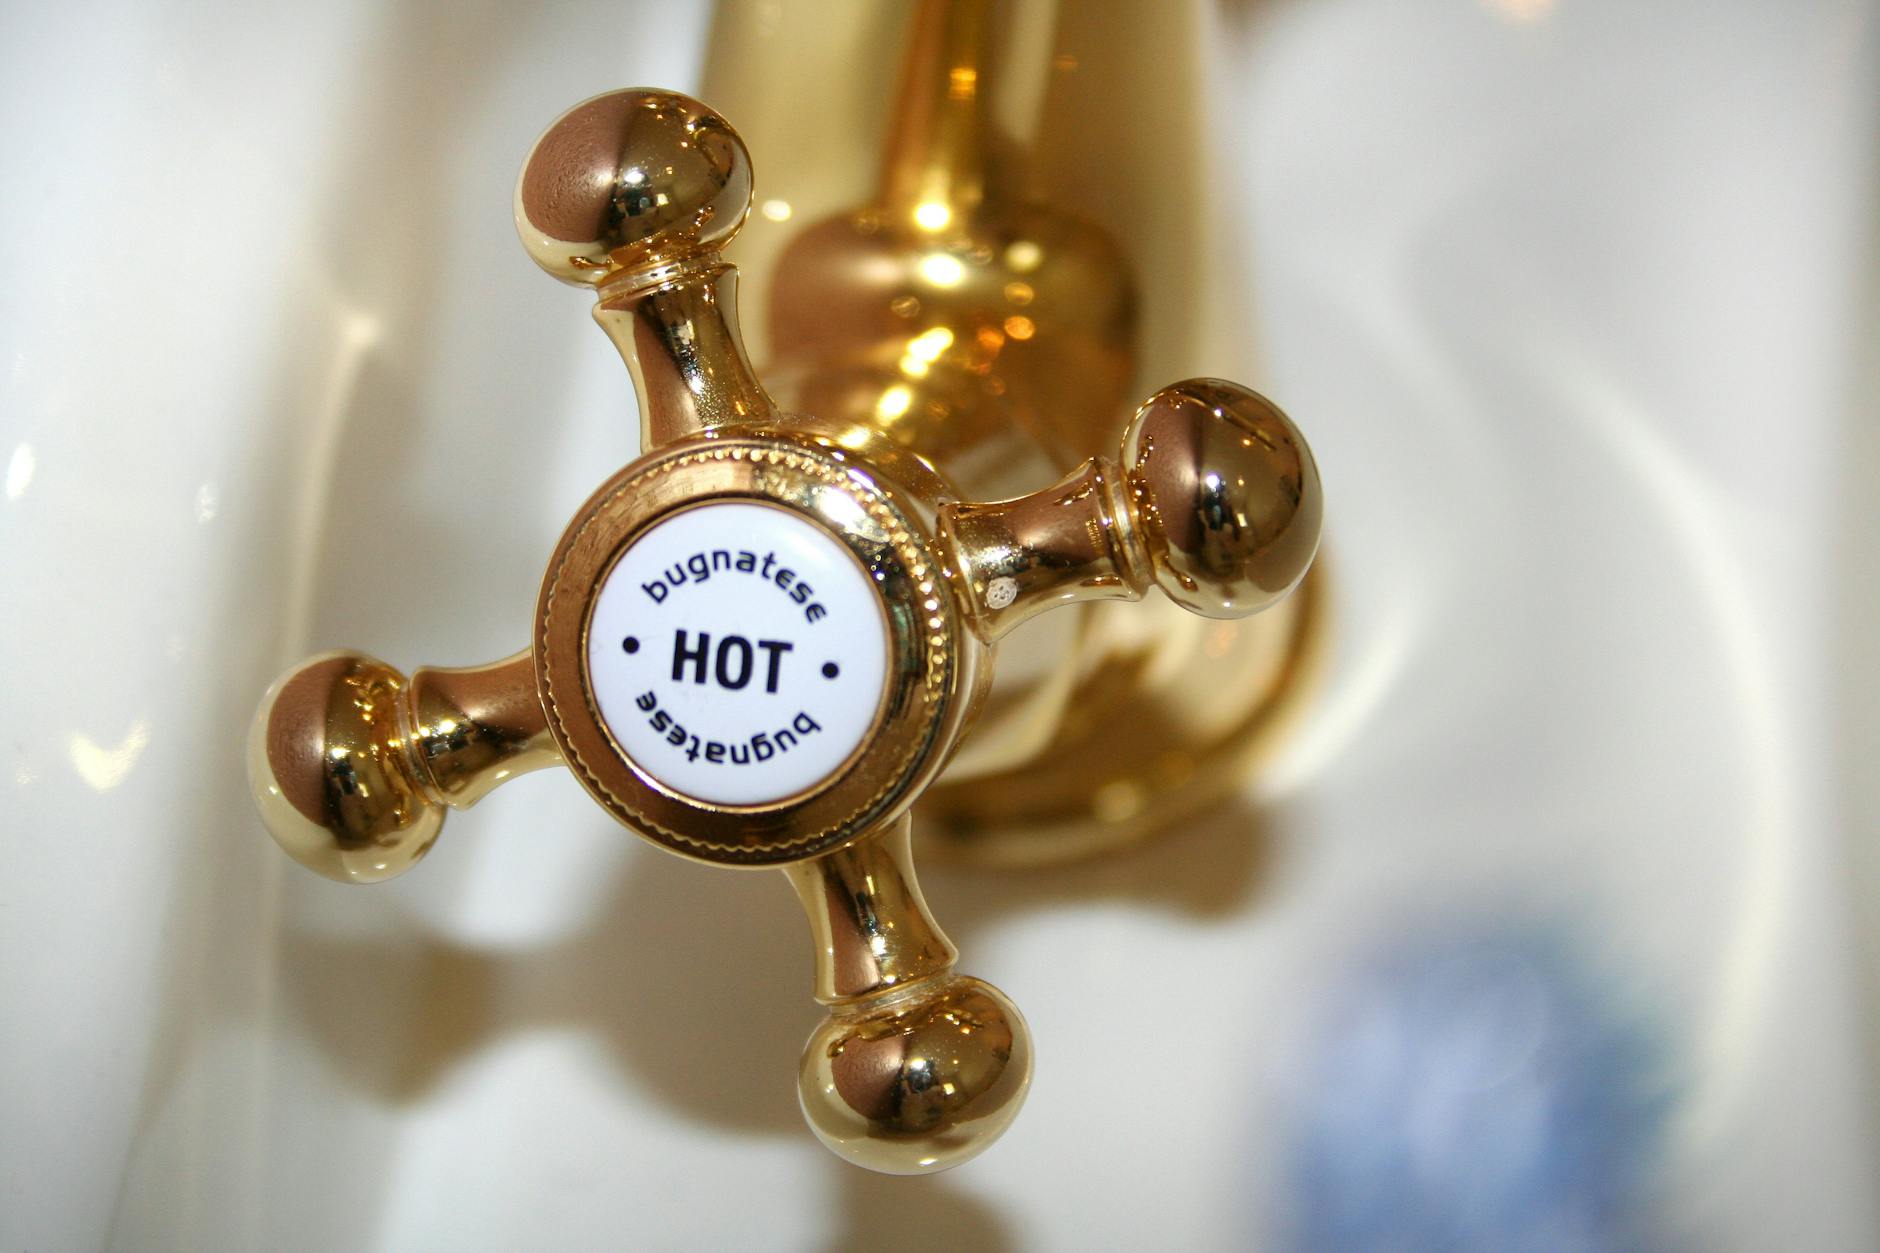 Faucet valve for hot water